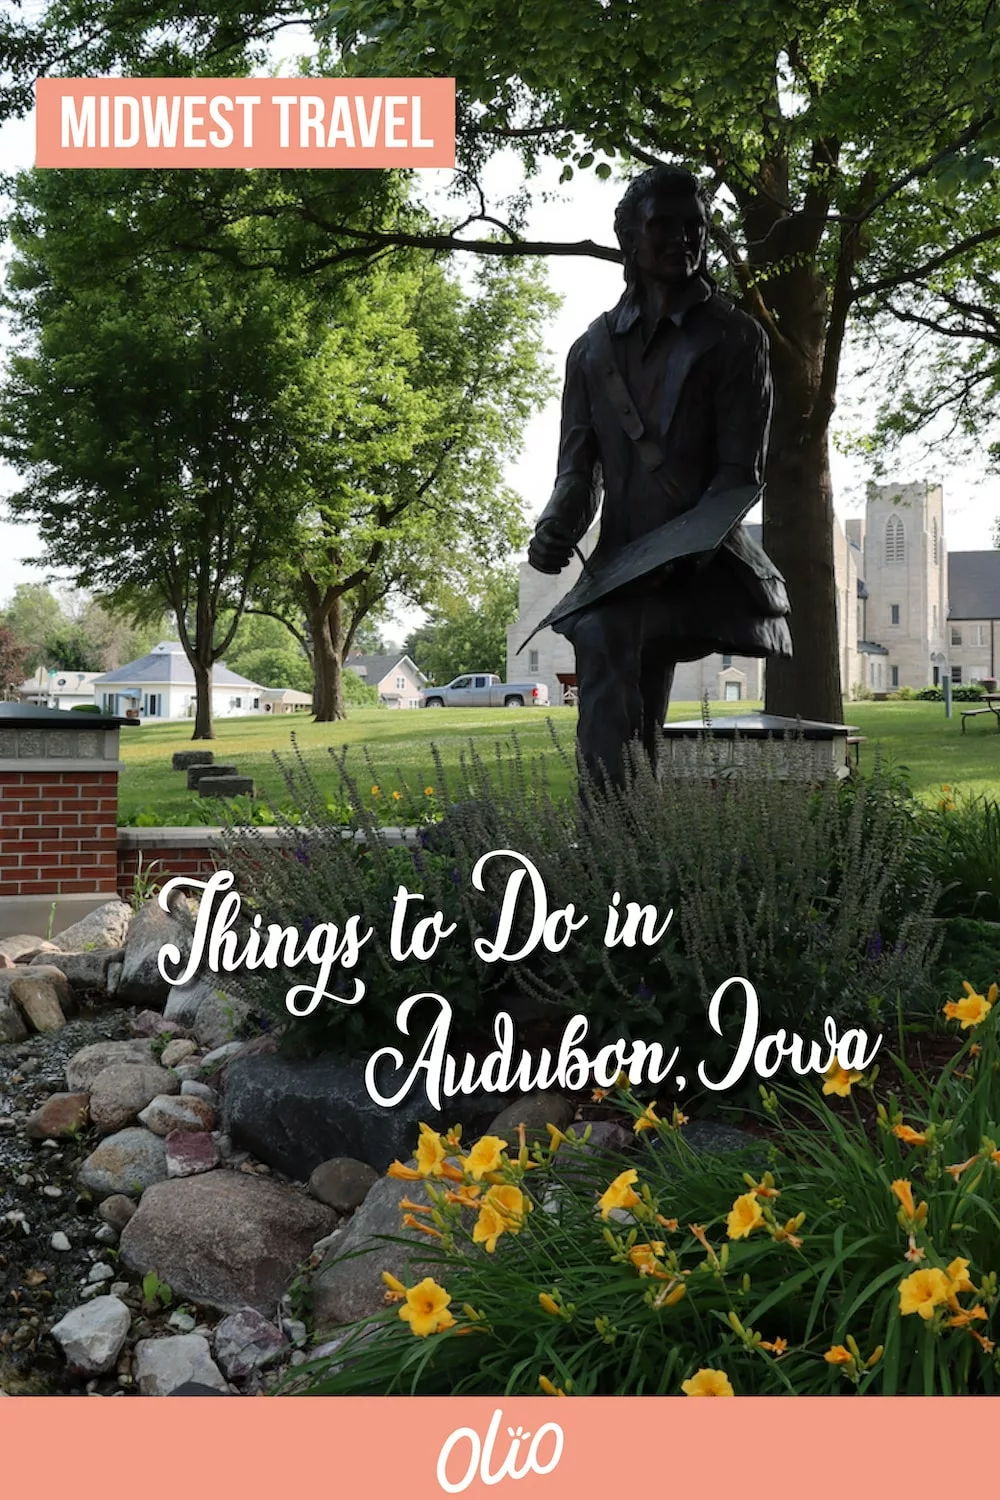 When was the last time you explored rural Iowa? You’ll find no shortage of things to do in Audubon, Iowa, home of Albert the World’s Largest Bull, thriving small businesses and so much more.